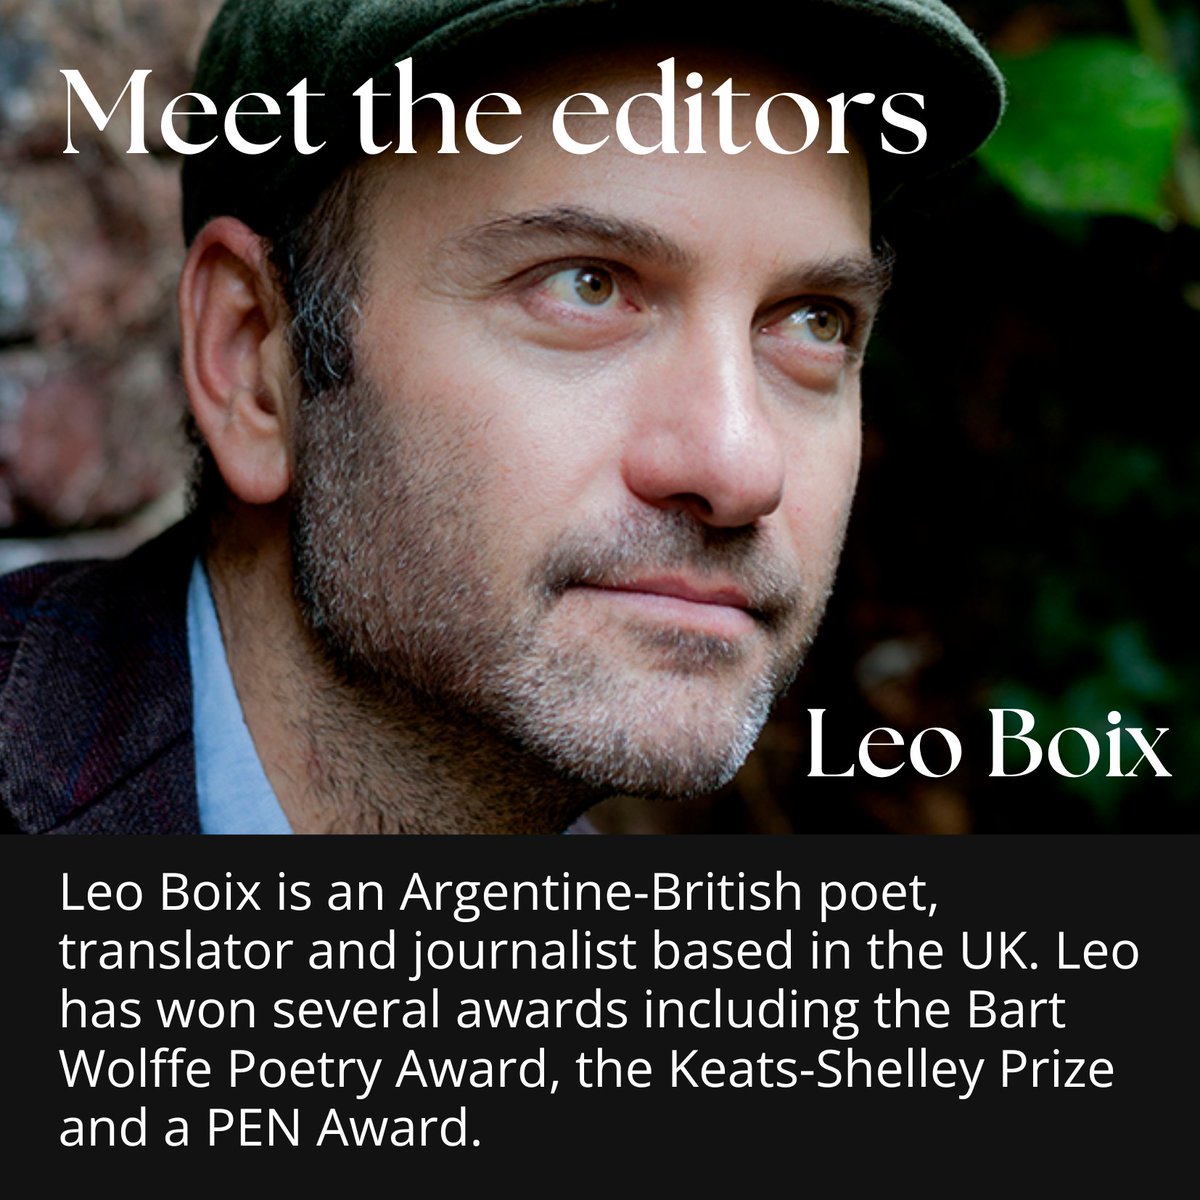 @leoboix is a poet, translator and journalist whose poetry has been included in several anthologies, including 'Ten: Poets of the New Generation' and '100 Poems to Save The Earth'.